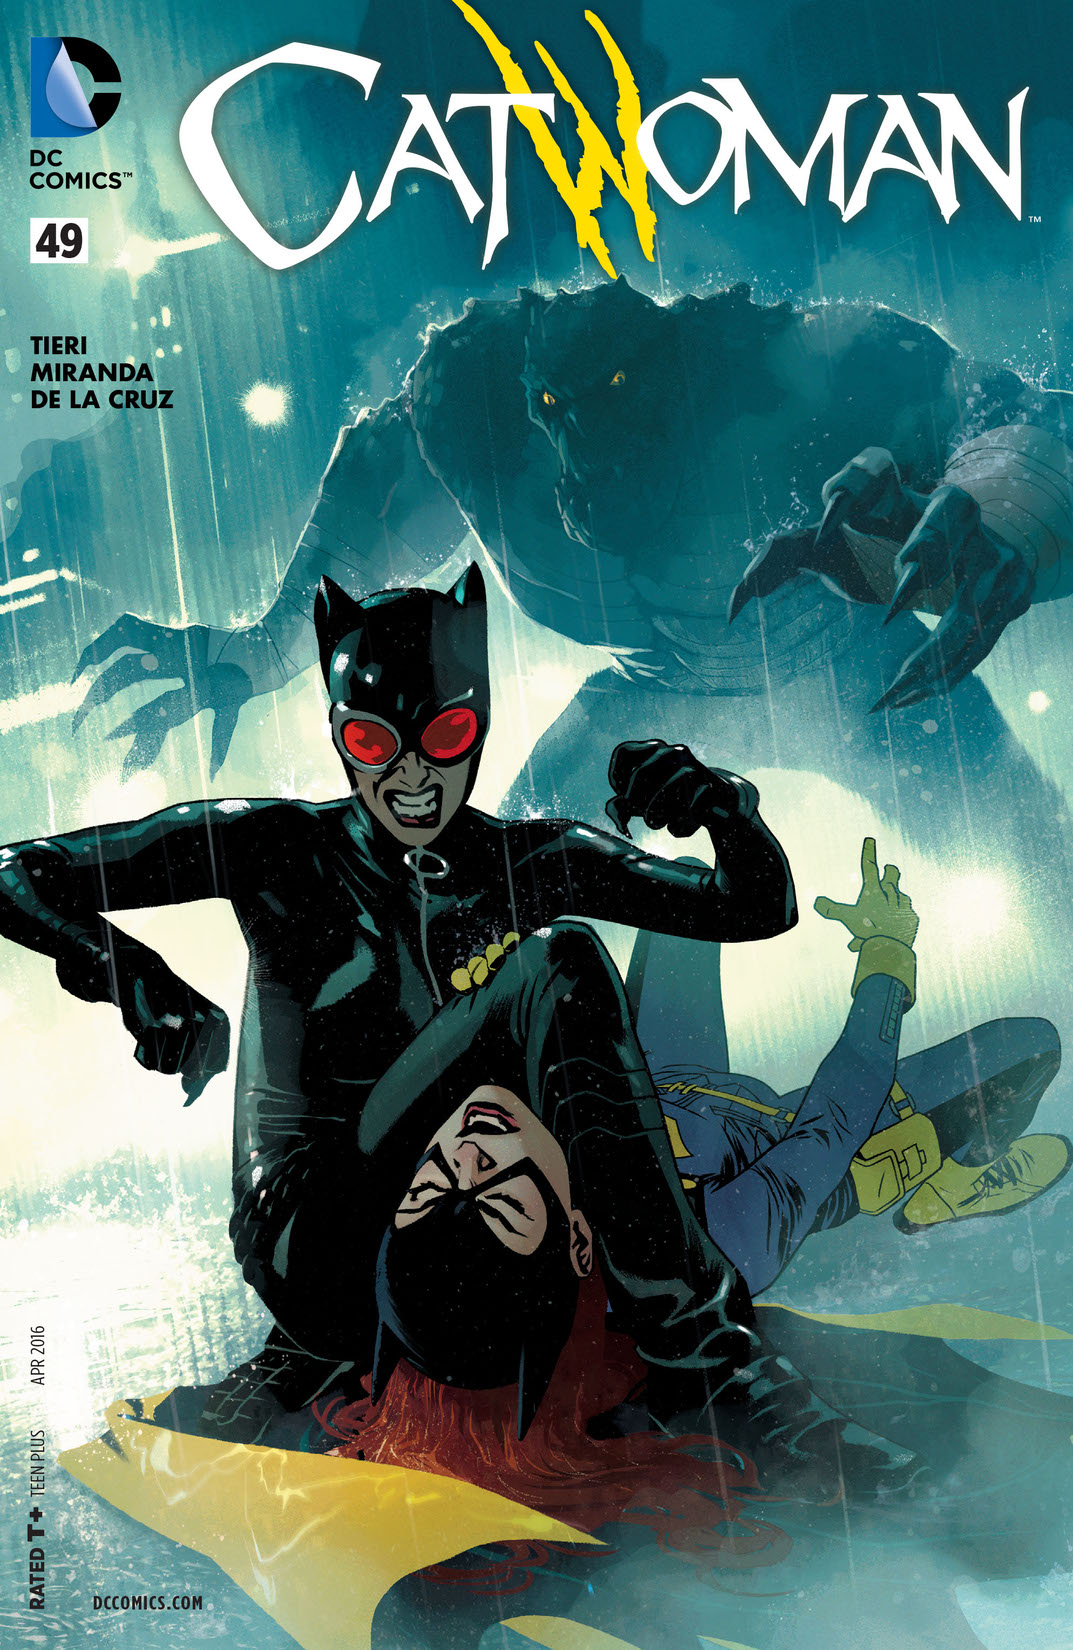 Catwoman (2011-) #49 preview images